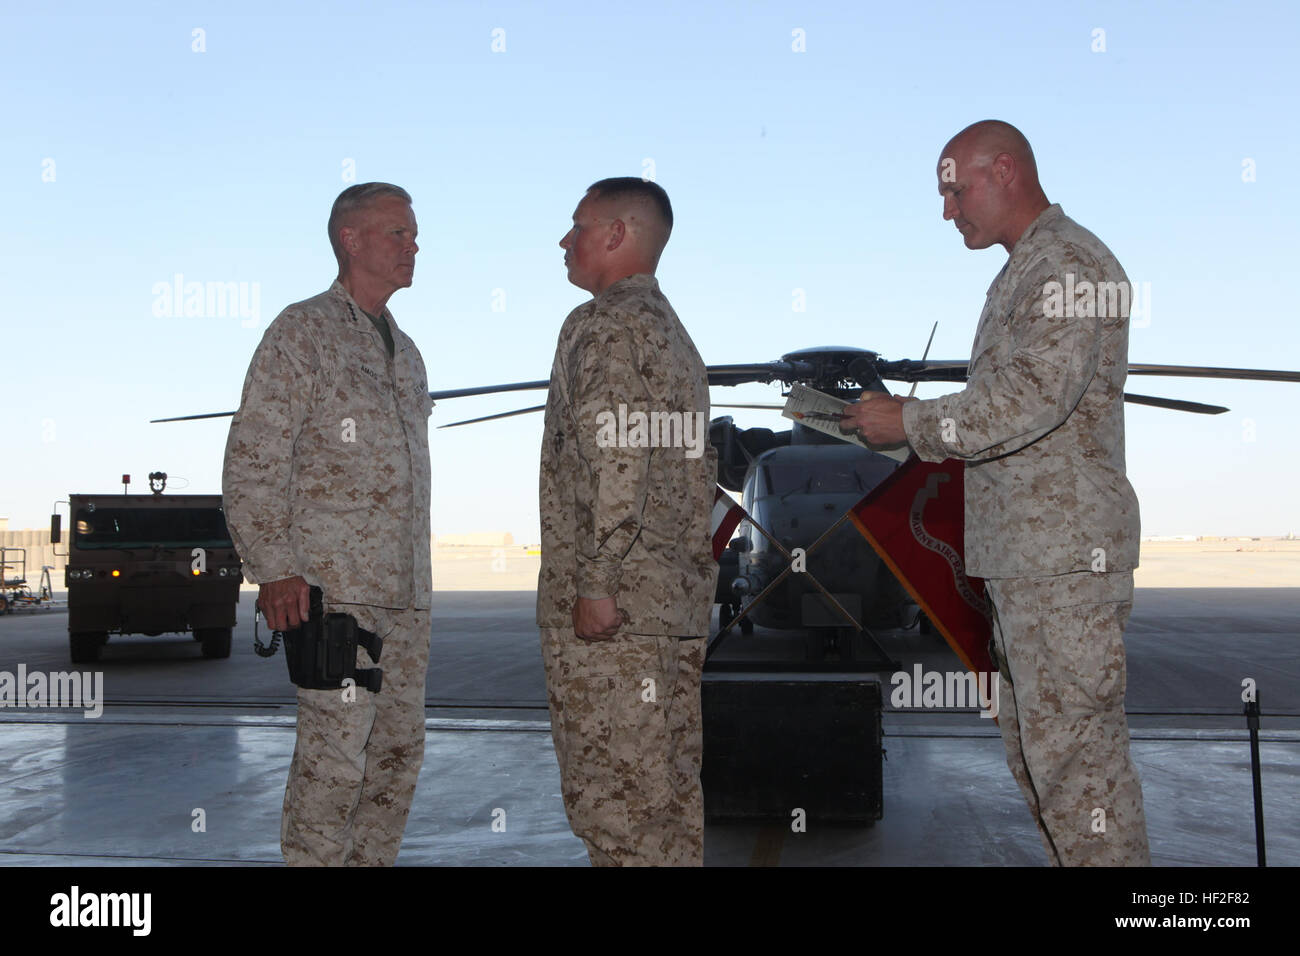 Sergeant Maj. Micheal Barrett, right, the 17th Sergeant Major of the Marine  Corps, reads the meritorious promotion warrant of Lance Cpl. Matthew Padilla, an airframe mechanic with Marine Aviation Logistics Squadron 70, Marine Aircraft Group - Afghanistan, during his meritorious promotion ceremony aboard Camp Leatherneck, Afghanistan, Sept. 6, 2014. General James F. Amos, the 35th Commandant of the Marine Corps, meritoriously promoted Padilla, a native of Littleton, Colo., to the rank of corporal during his final visit to Helmand province. Commandant, Sergeant Major of the Marine Corps visit M Stock Photo